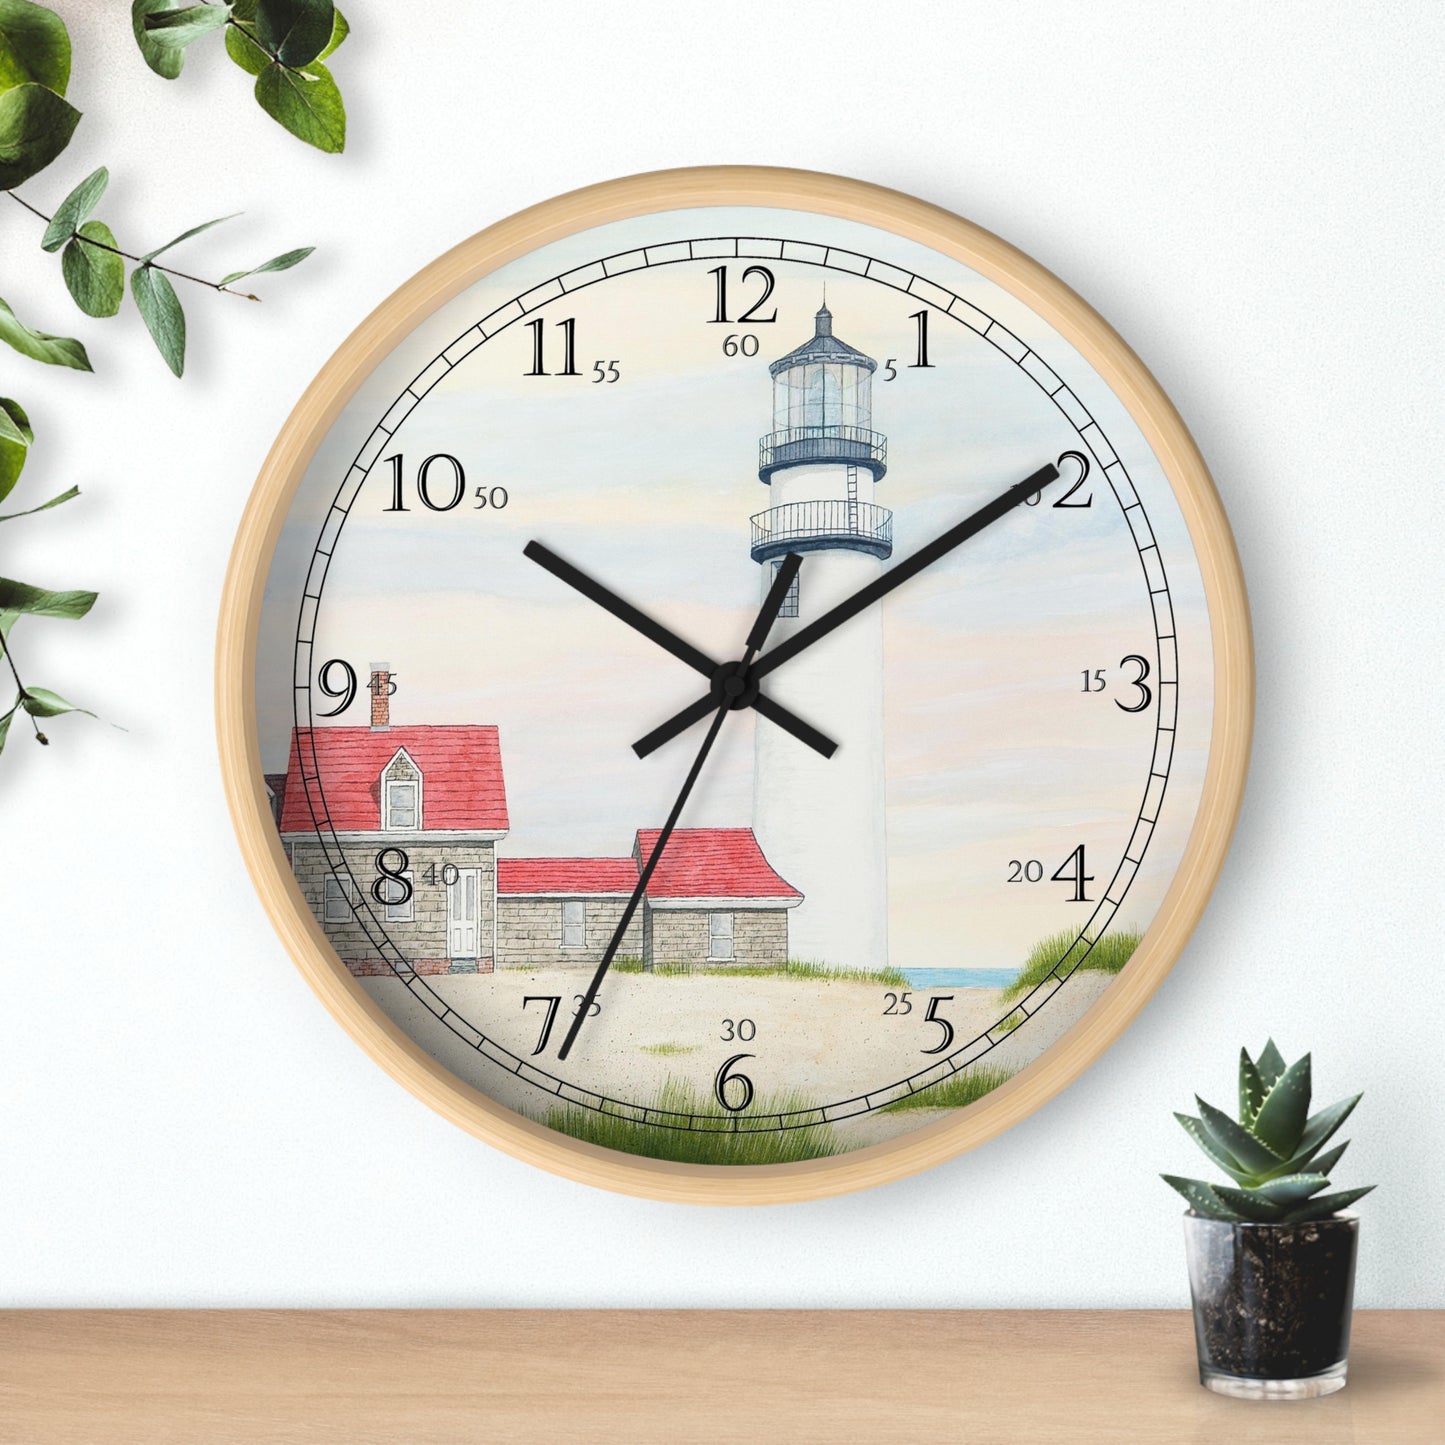 Stiff Breeze At Day's End English Numeral Clock